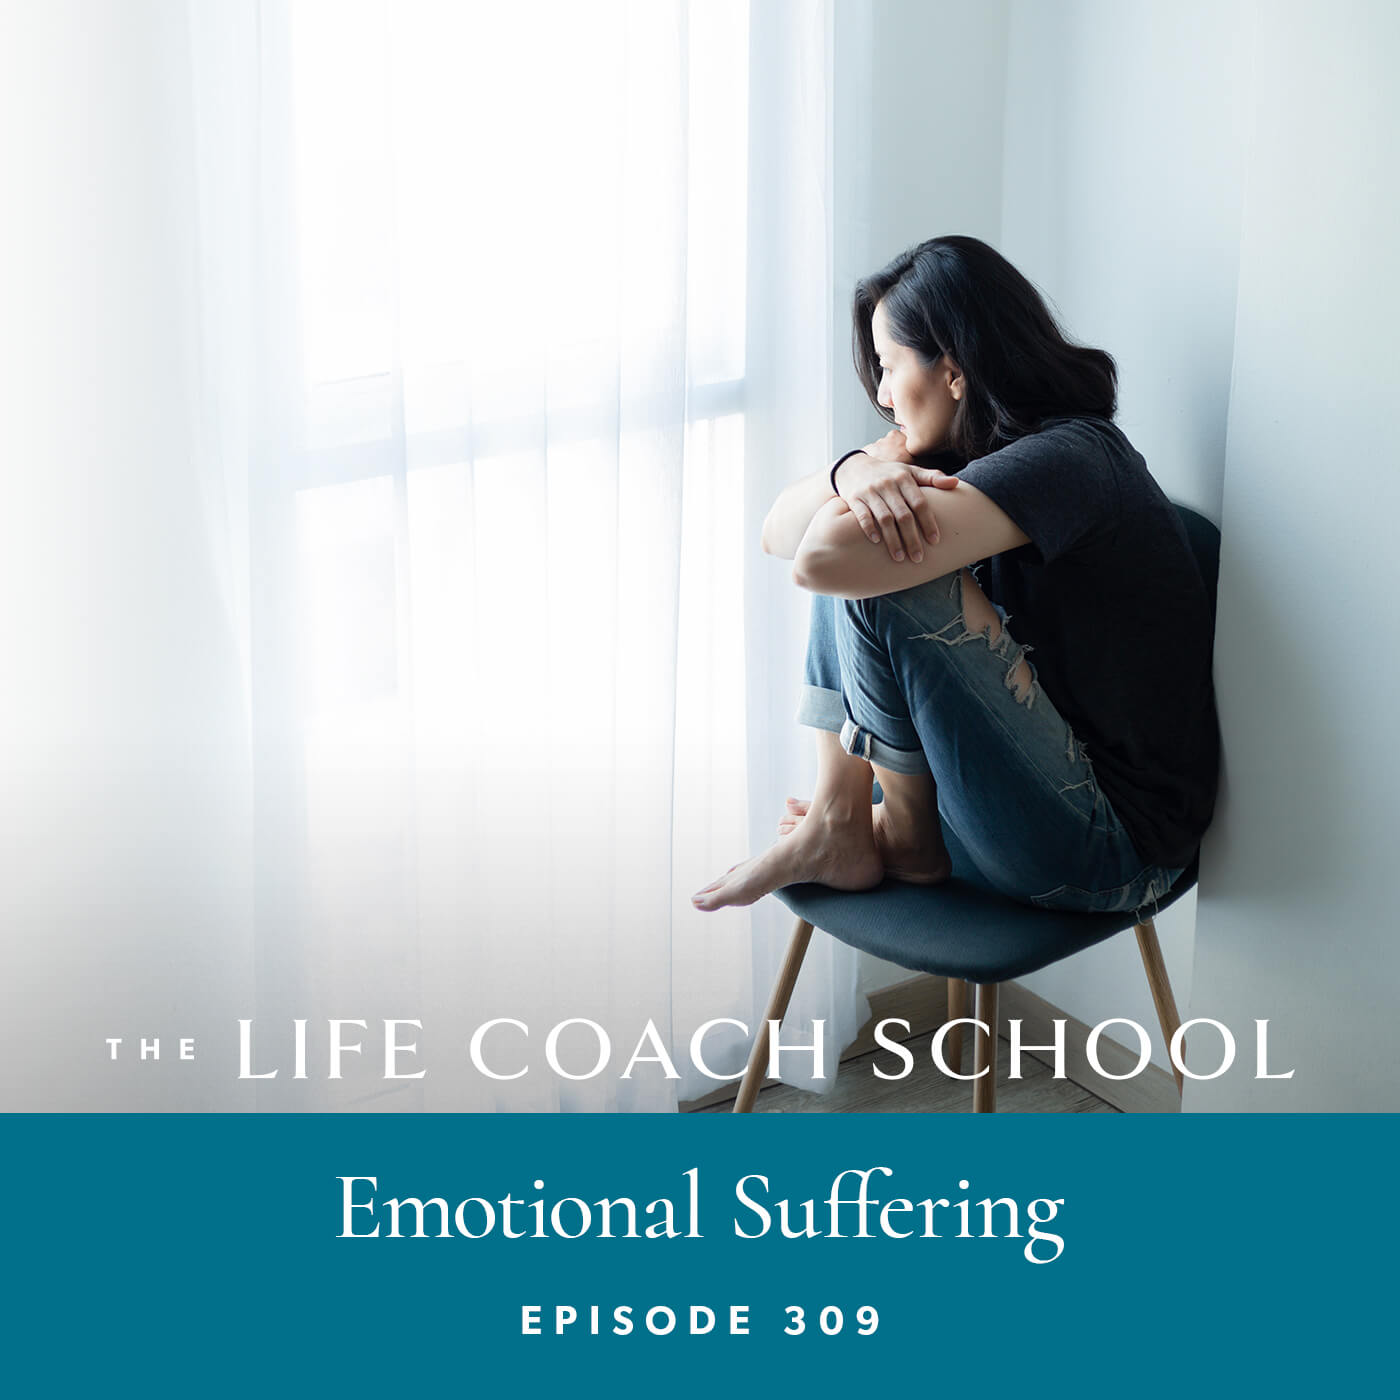 The Life Coach School Podcast with Brooke Castillo | Episode 309 | Emotional Suffering